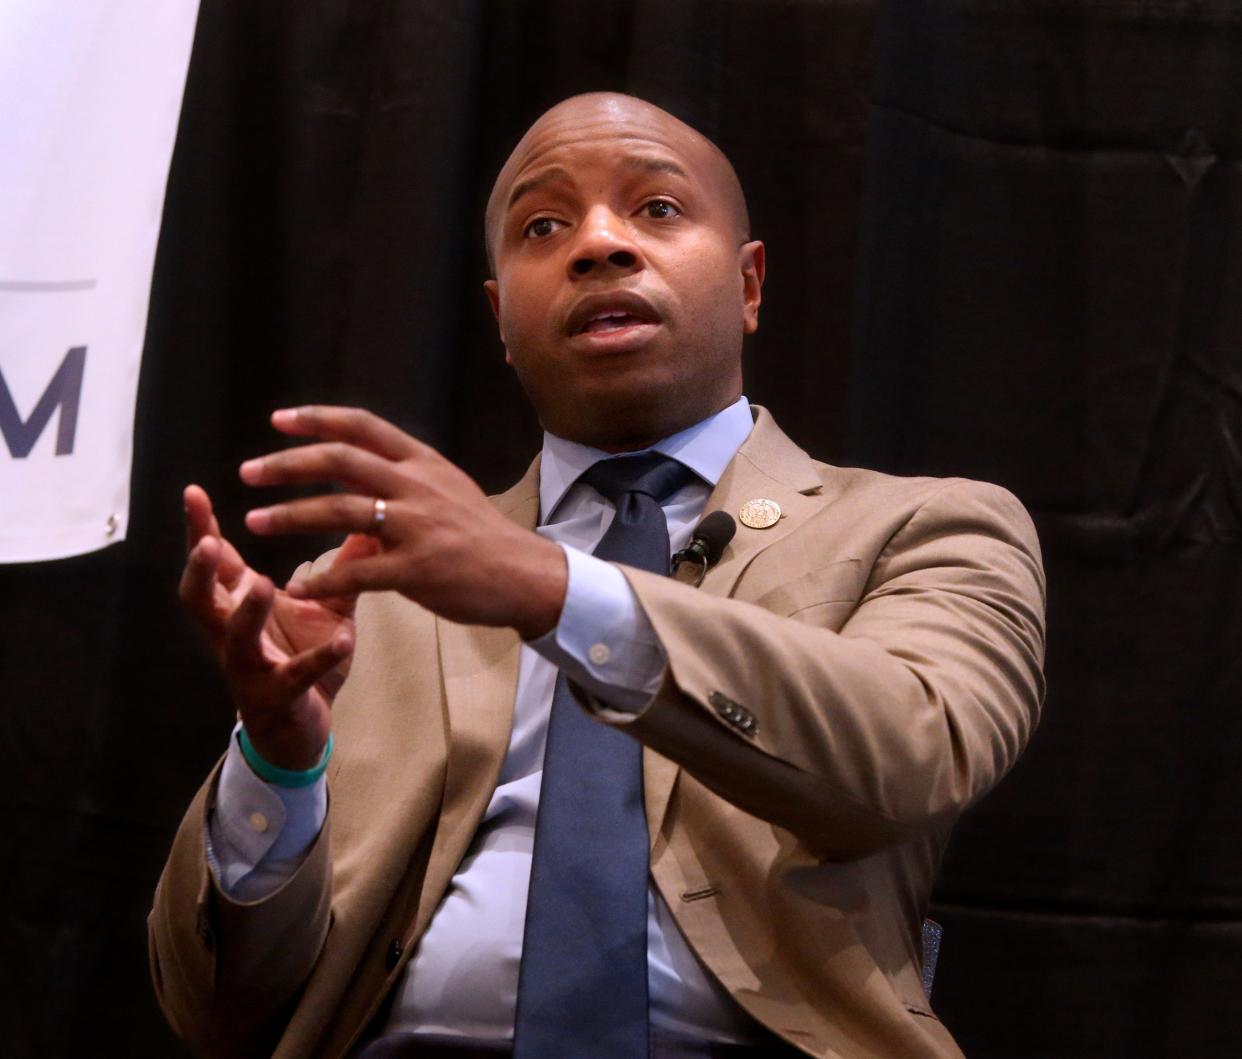 Milwaukee Mayor Cavalier Johnson says it remains his expectation that the Common Council will ultimately support bringing the 2024 Republican National Convention to the city.